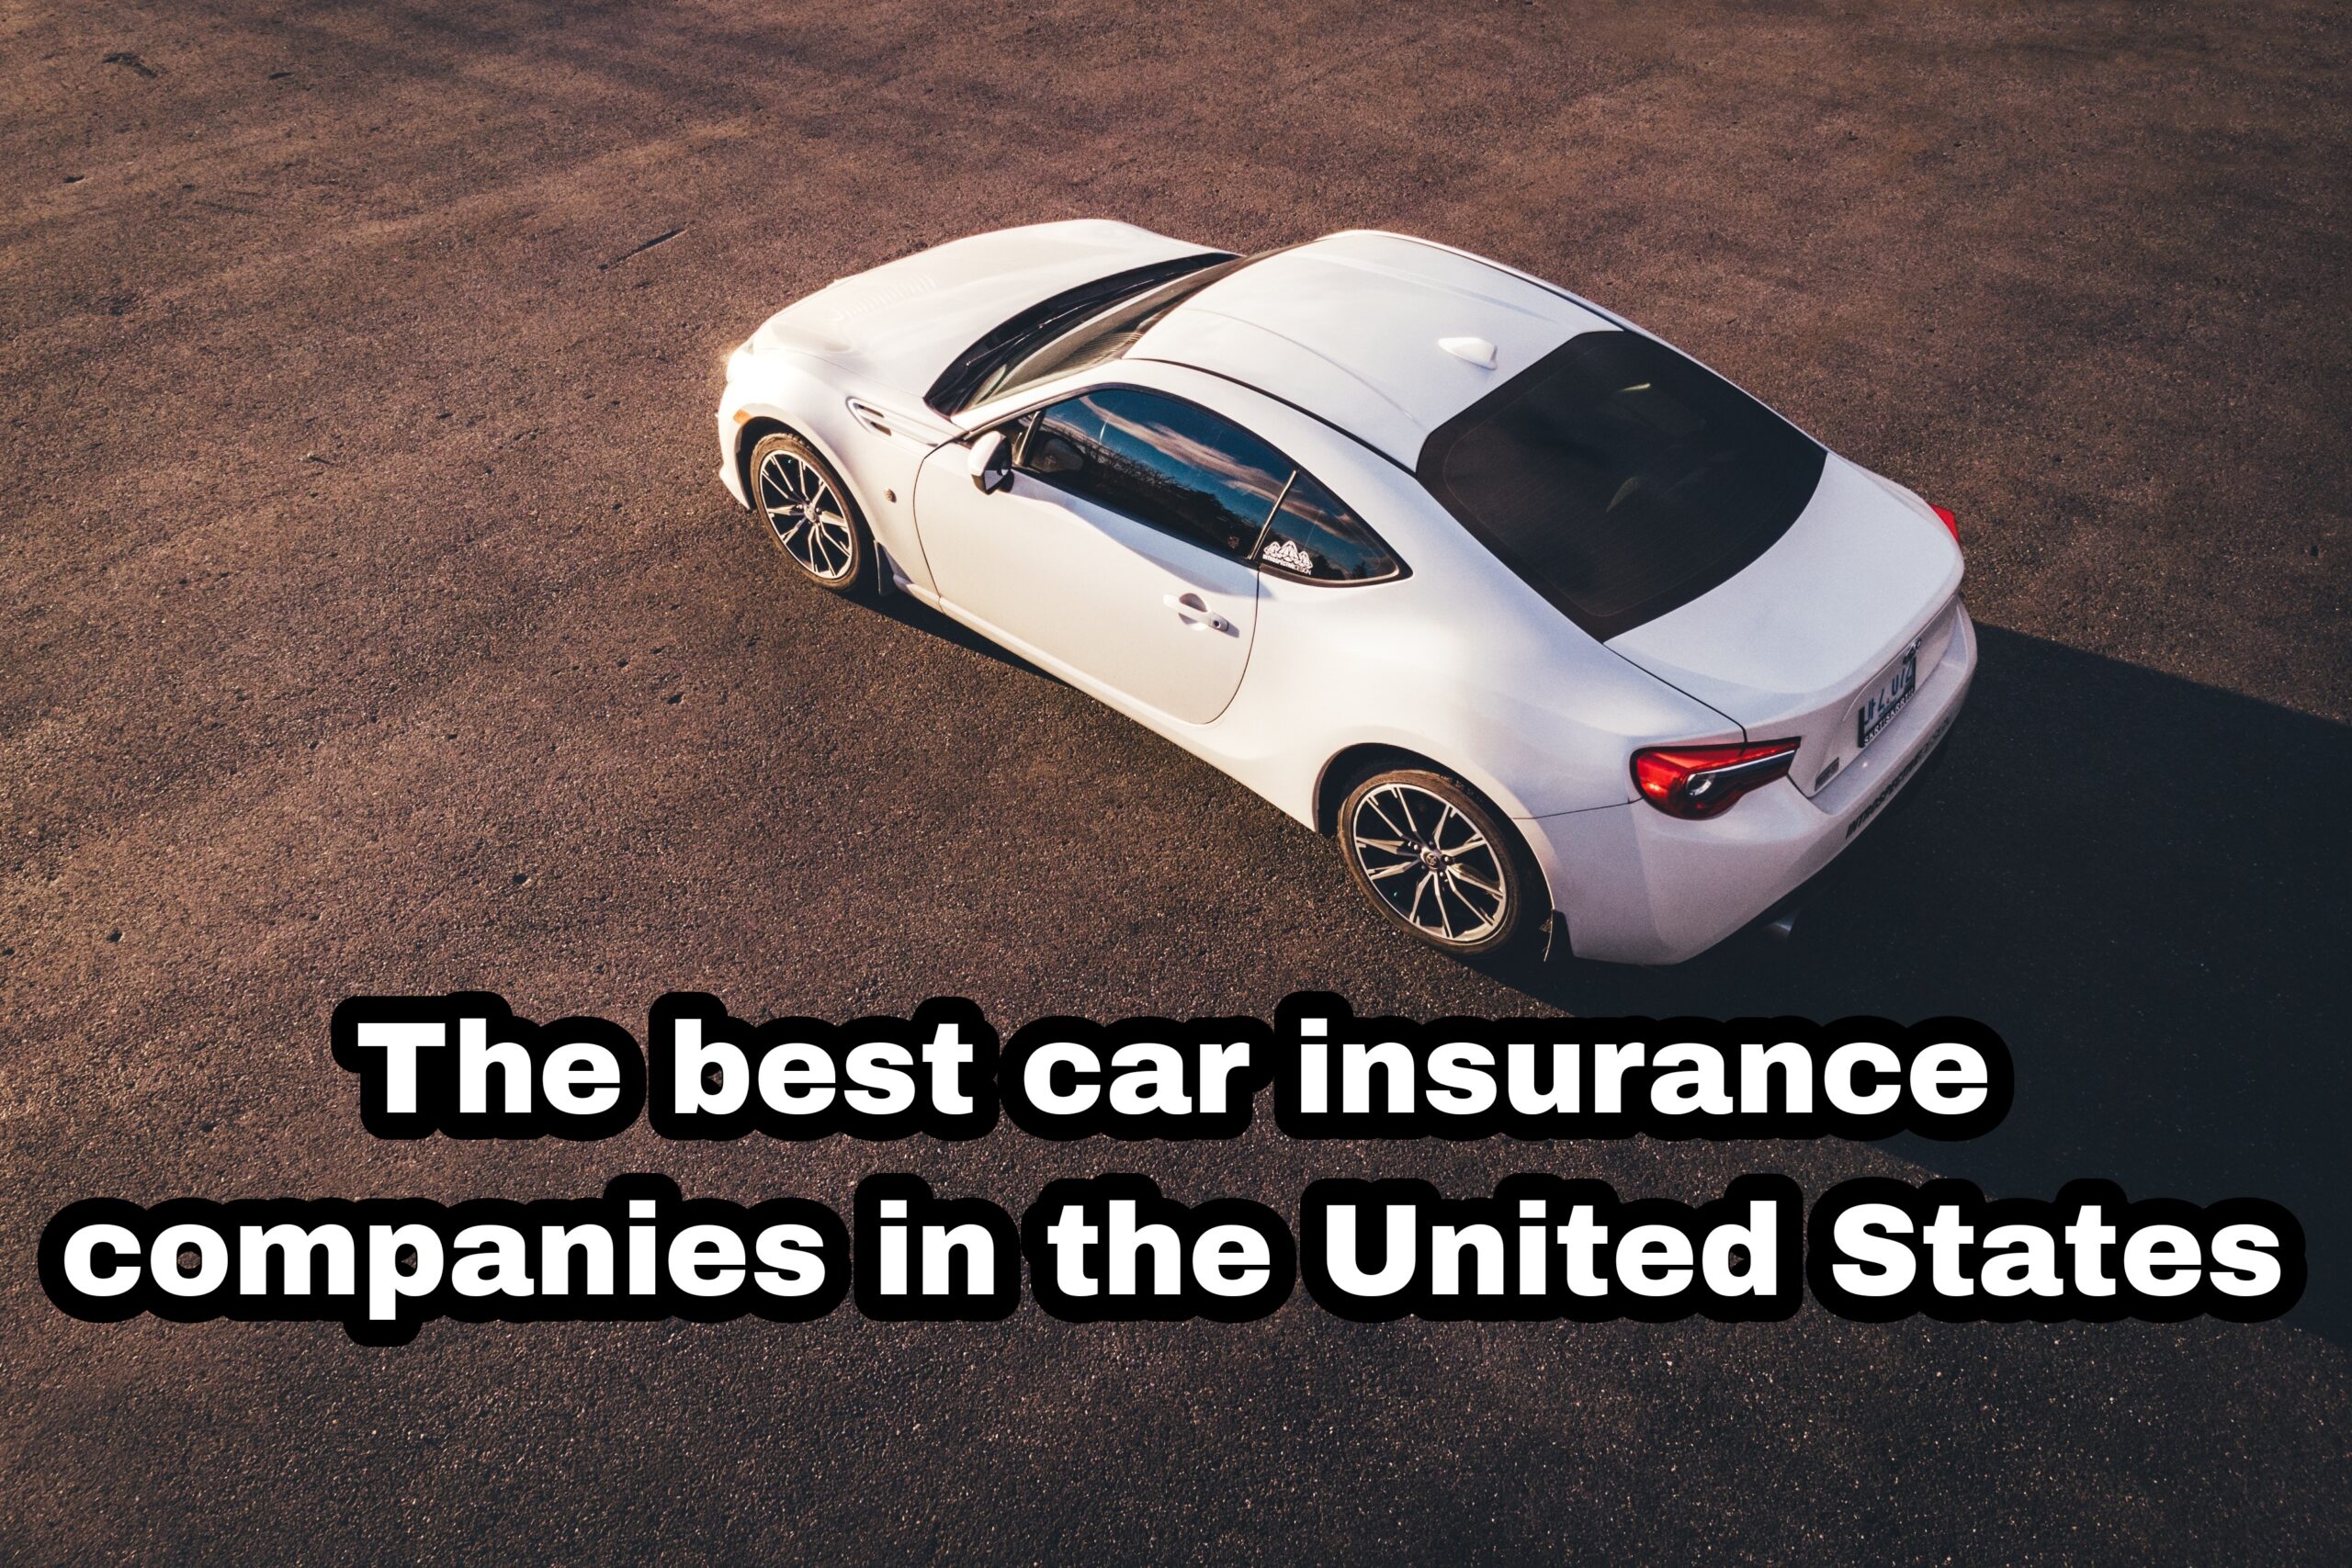 The best car insurance companies in the United States